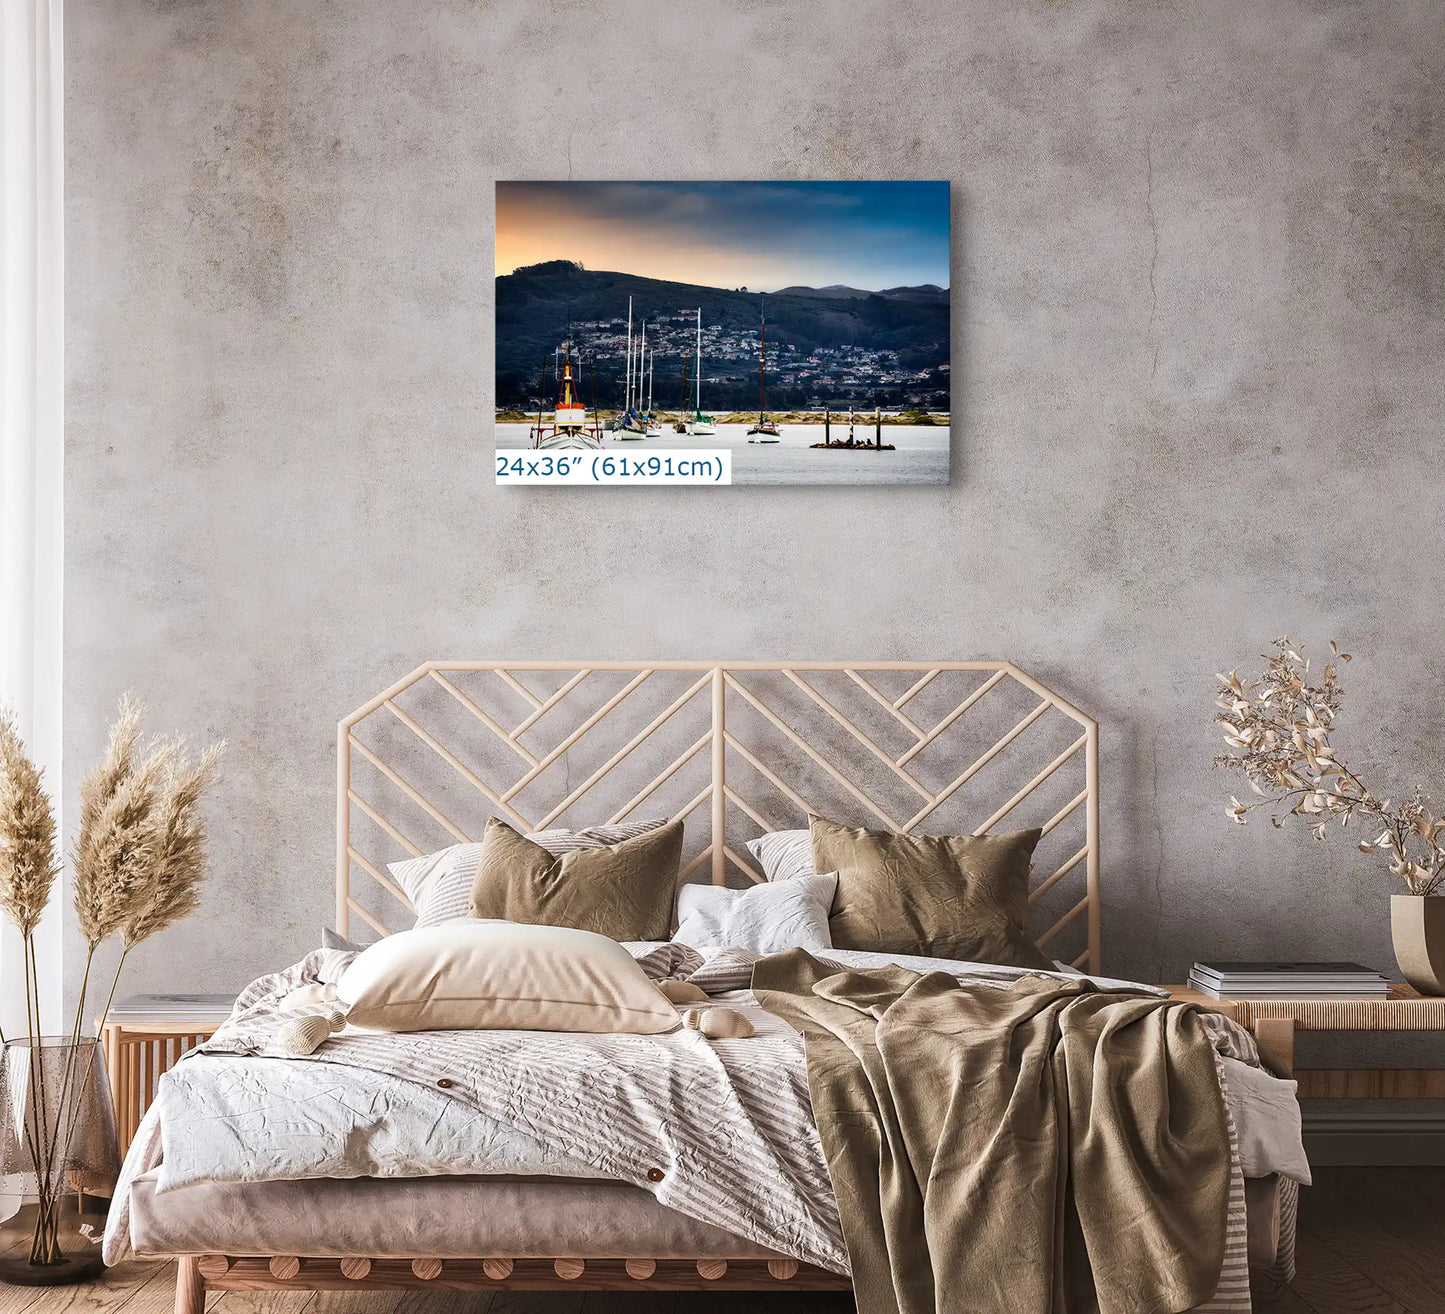 A 24x36 print exudes the heavenly calm of Morro Bay's sunrise, transforming a bedroom into a sanctuary of natural beauty.